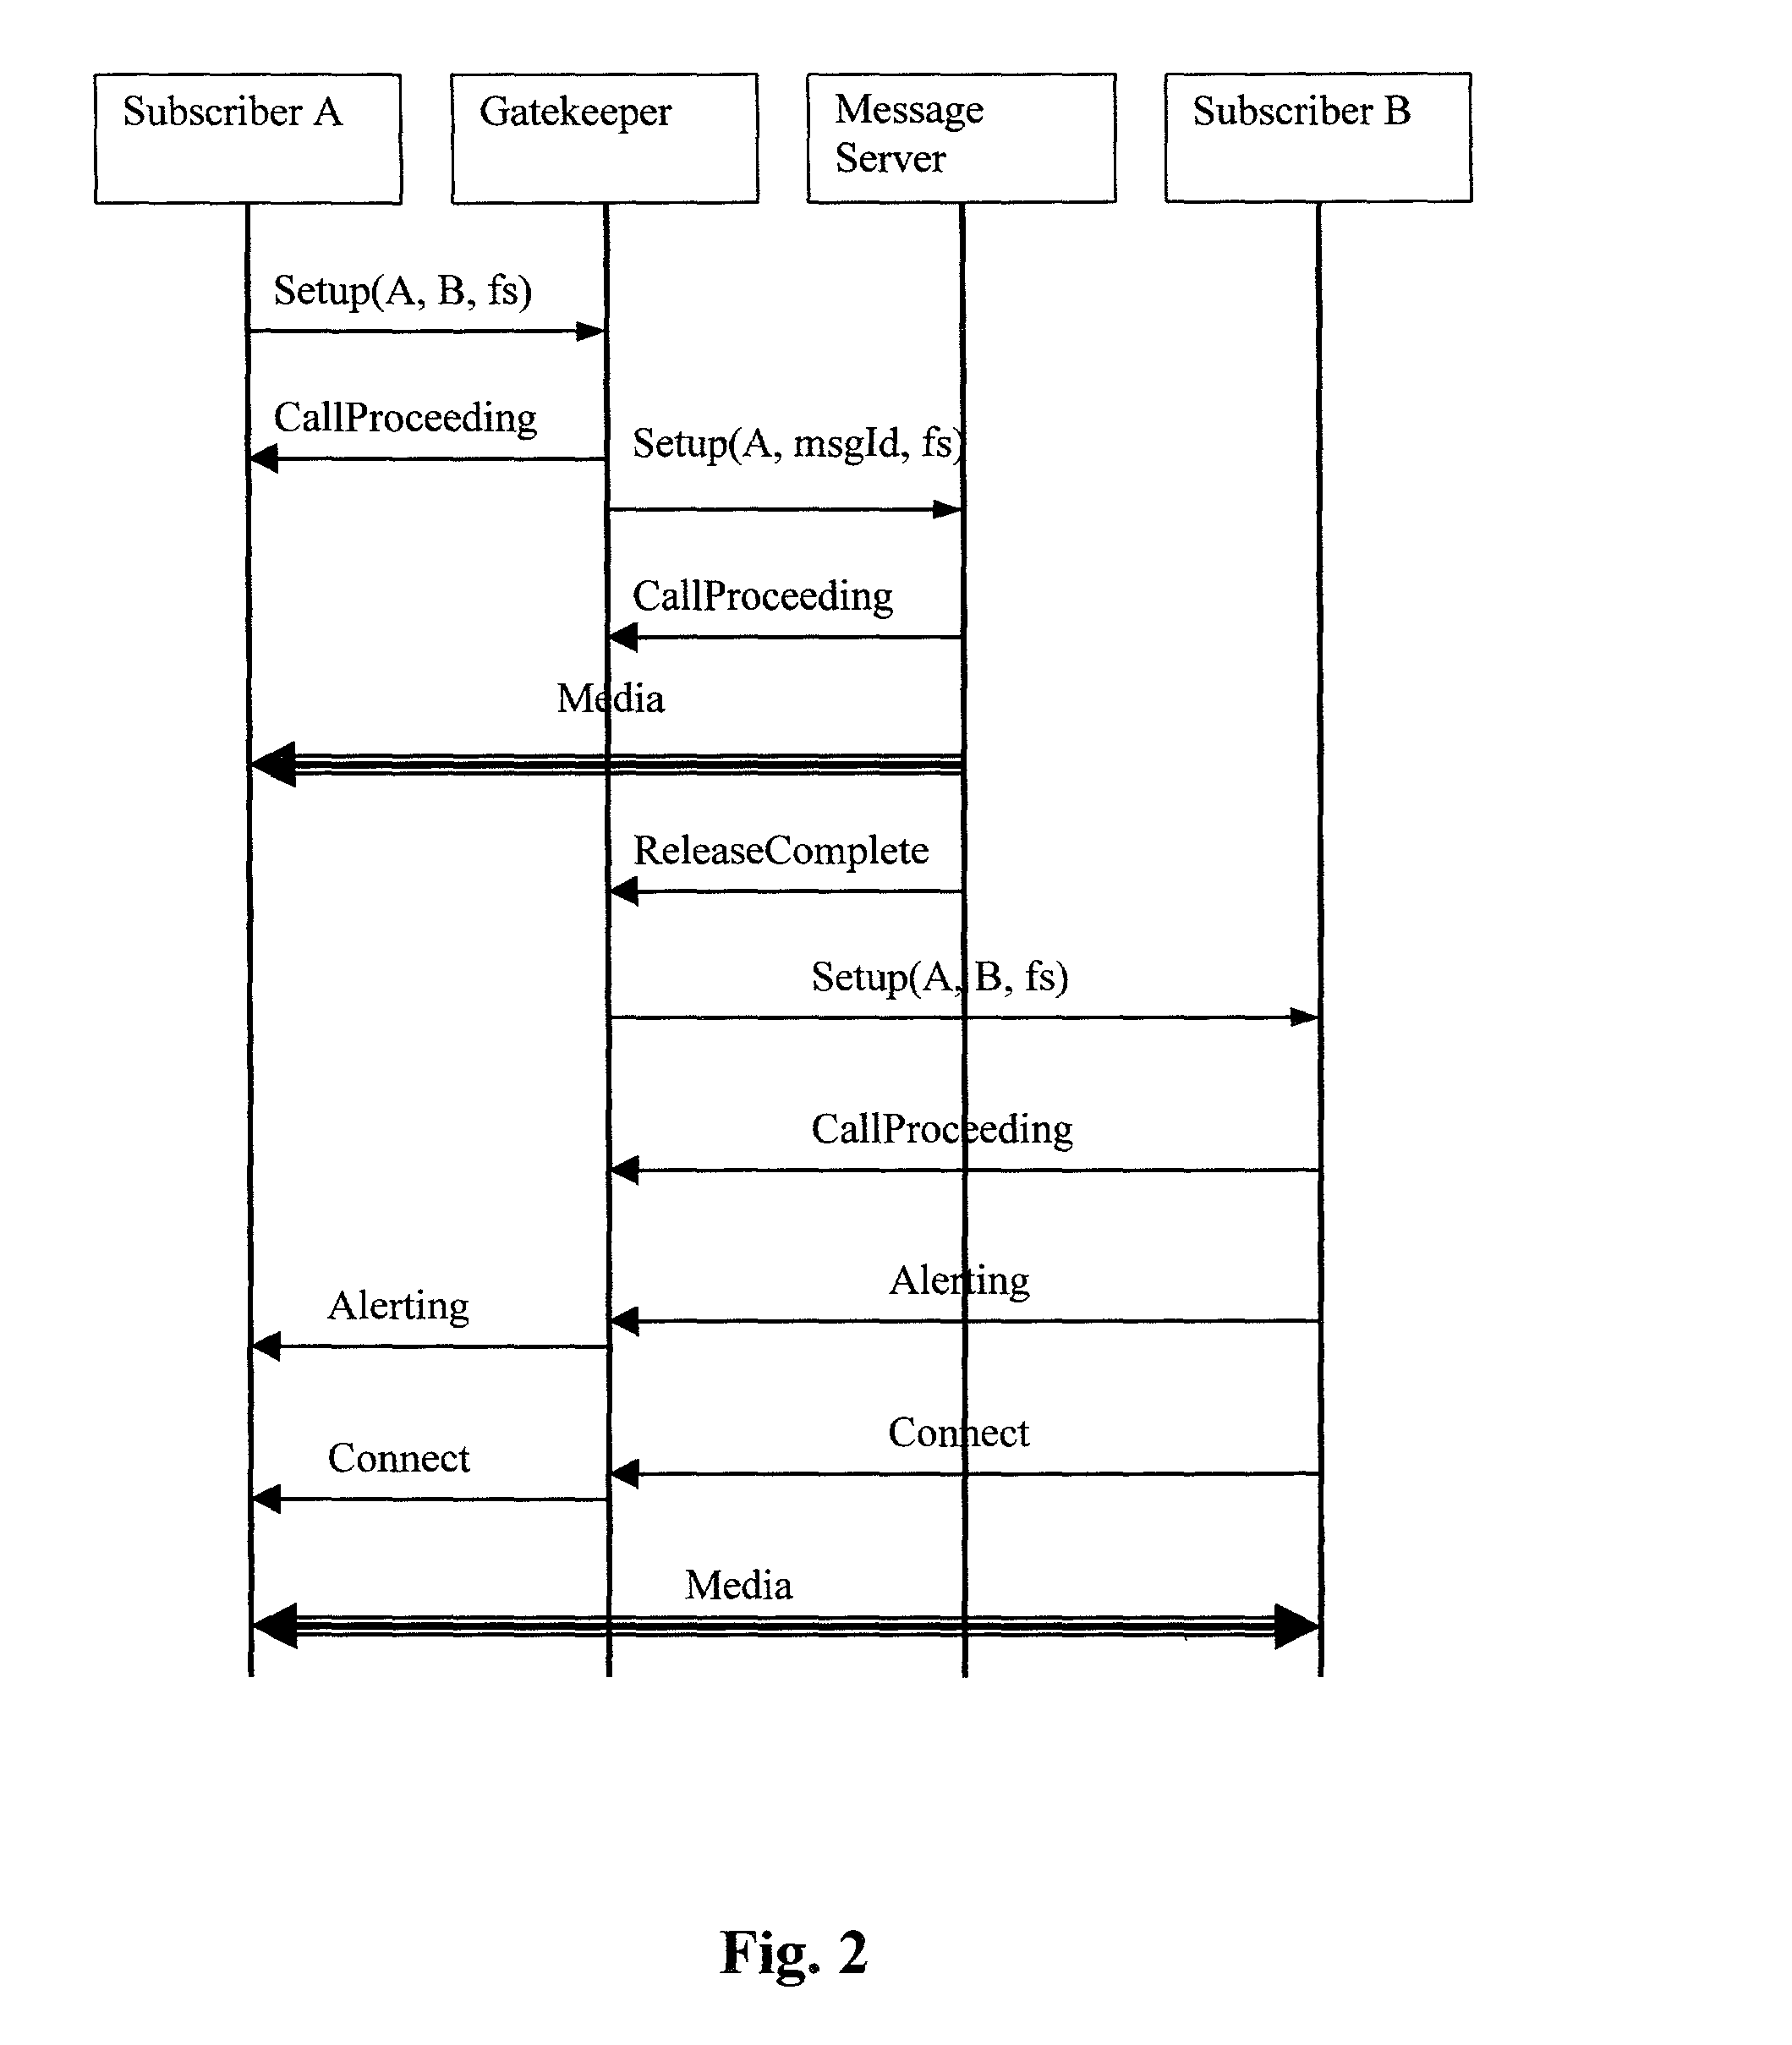 Messaging in H.323 networks at call setup